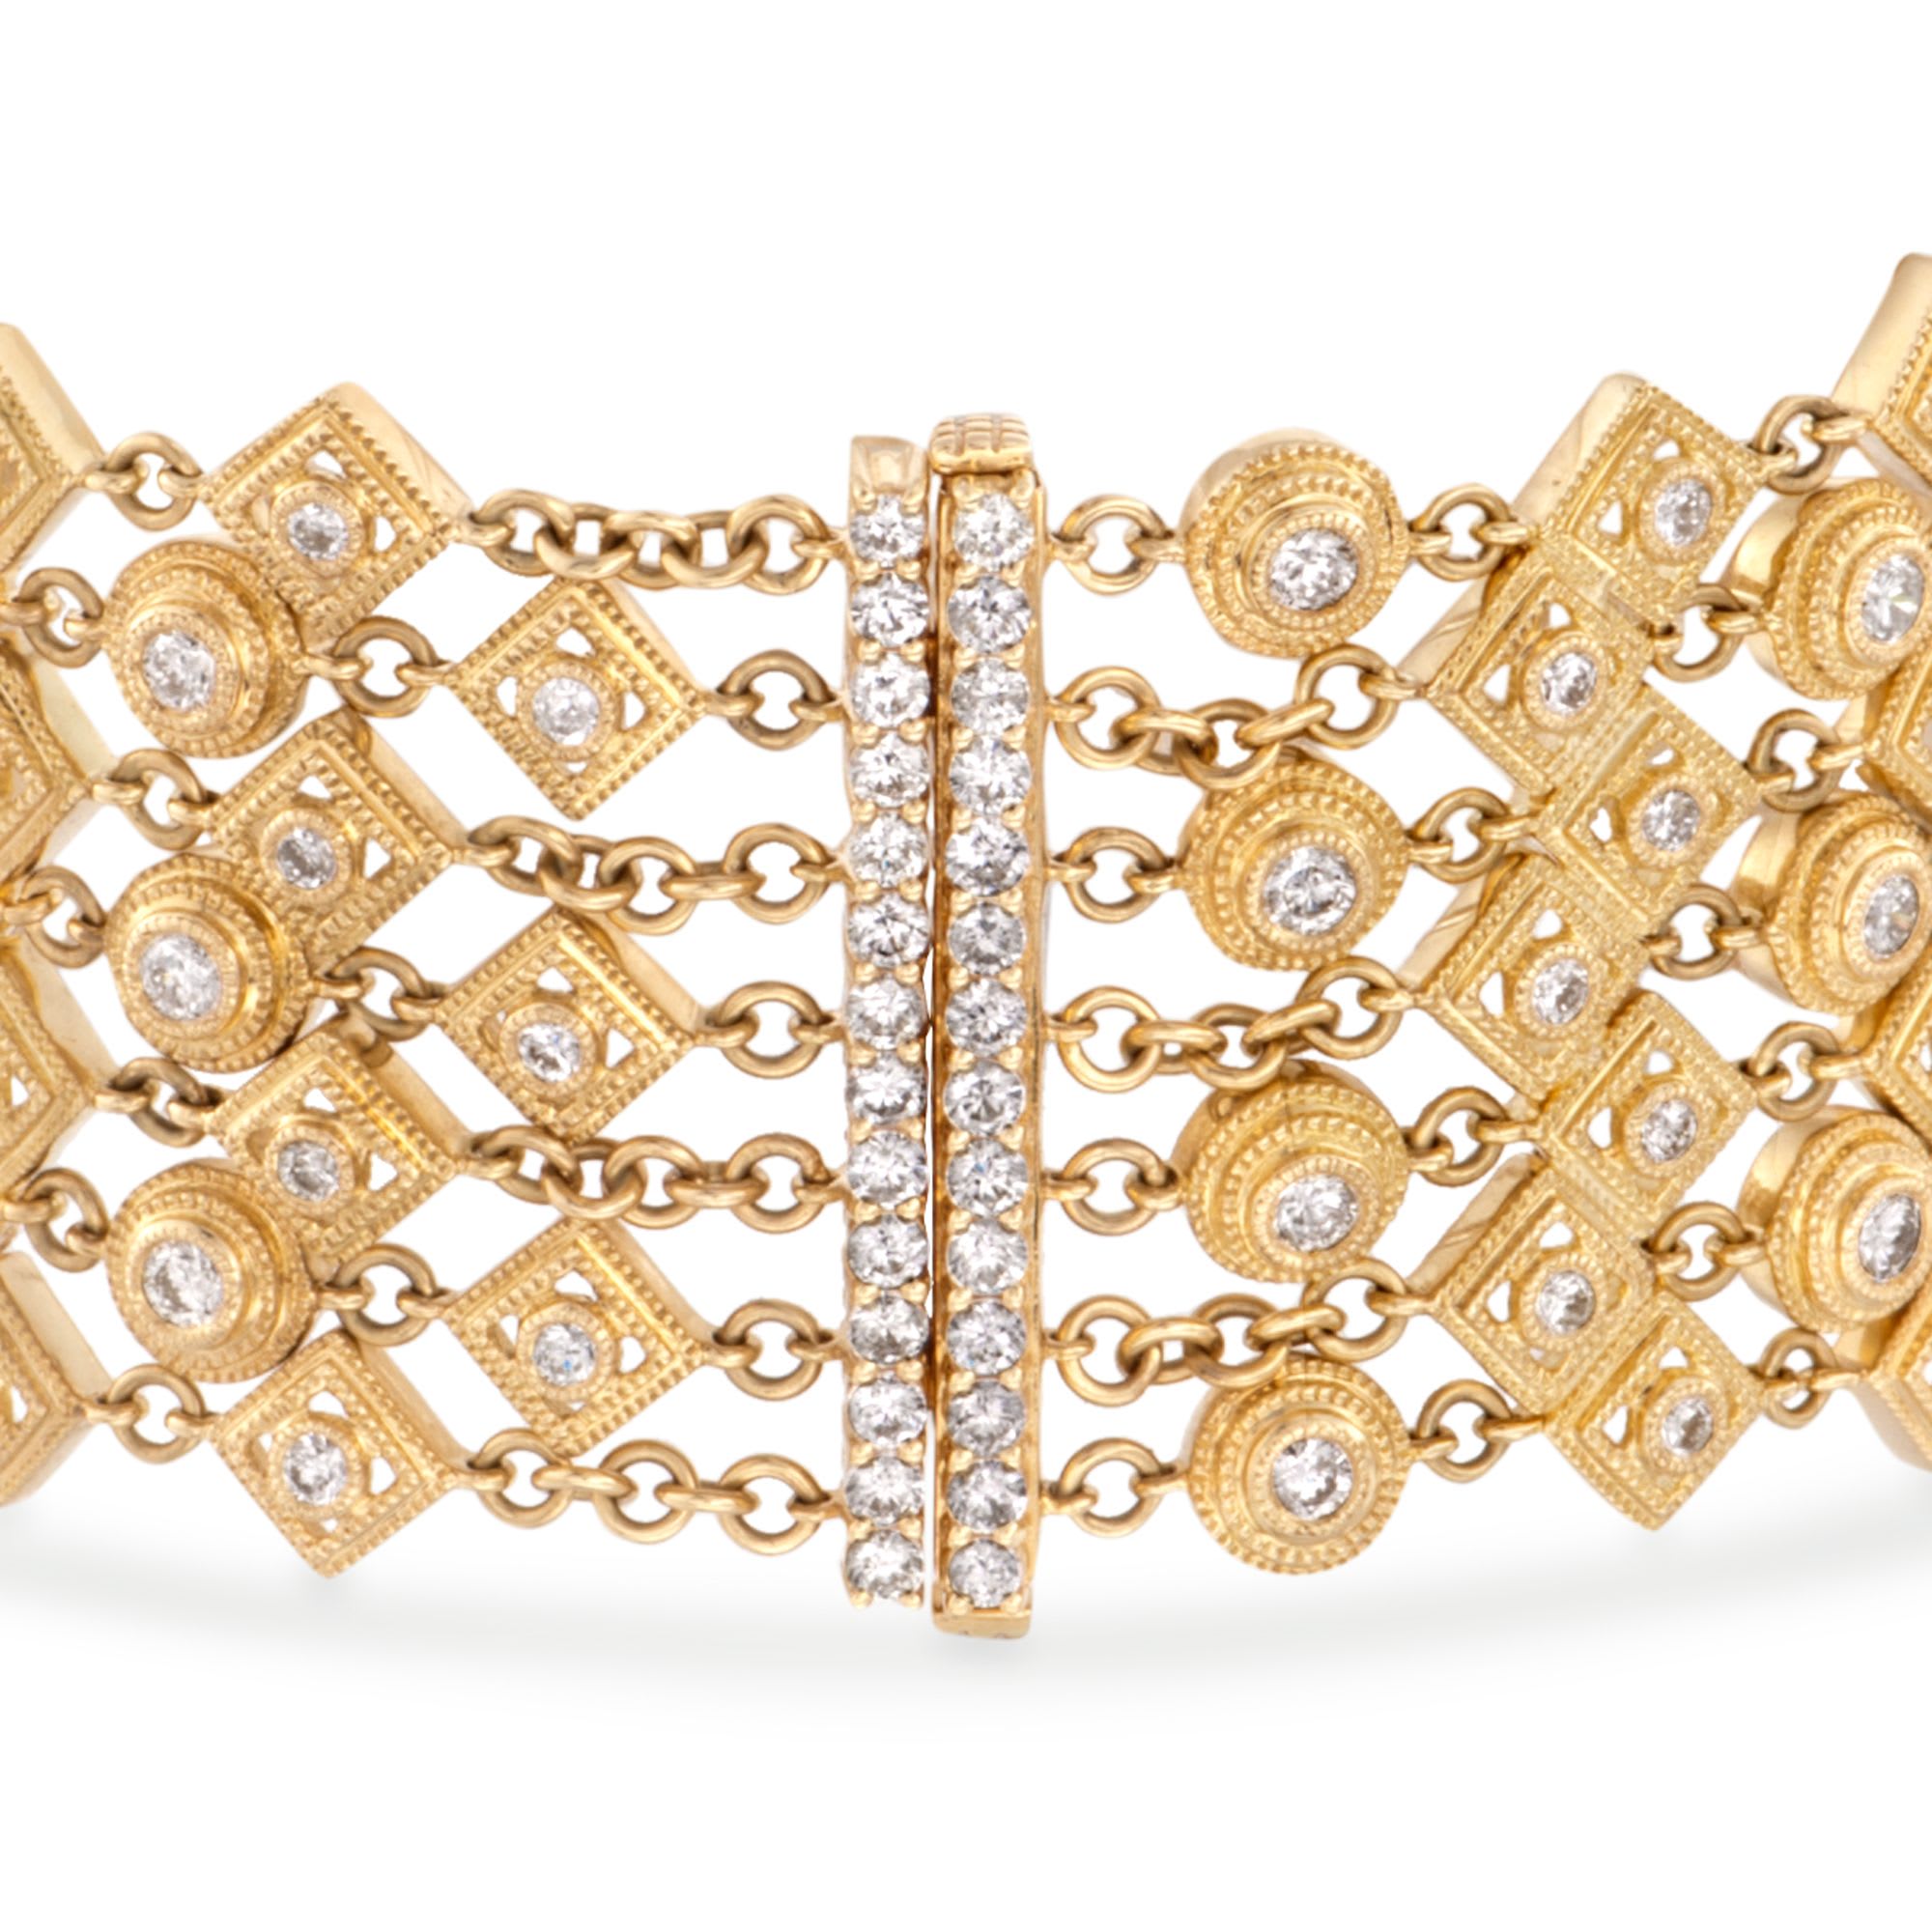 6.16 ct. t.w. Round and Square-Styled Wide Diamond Bracelet in 18kt ...